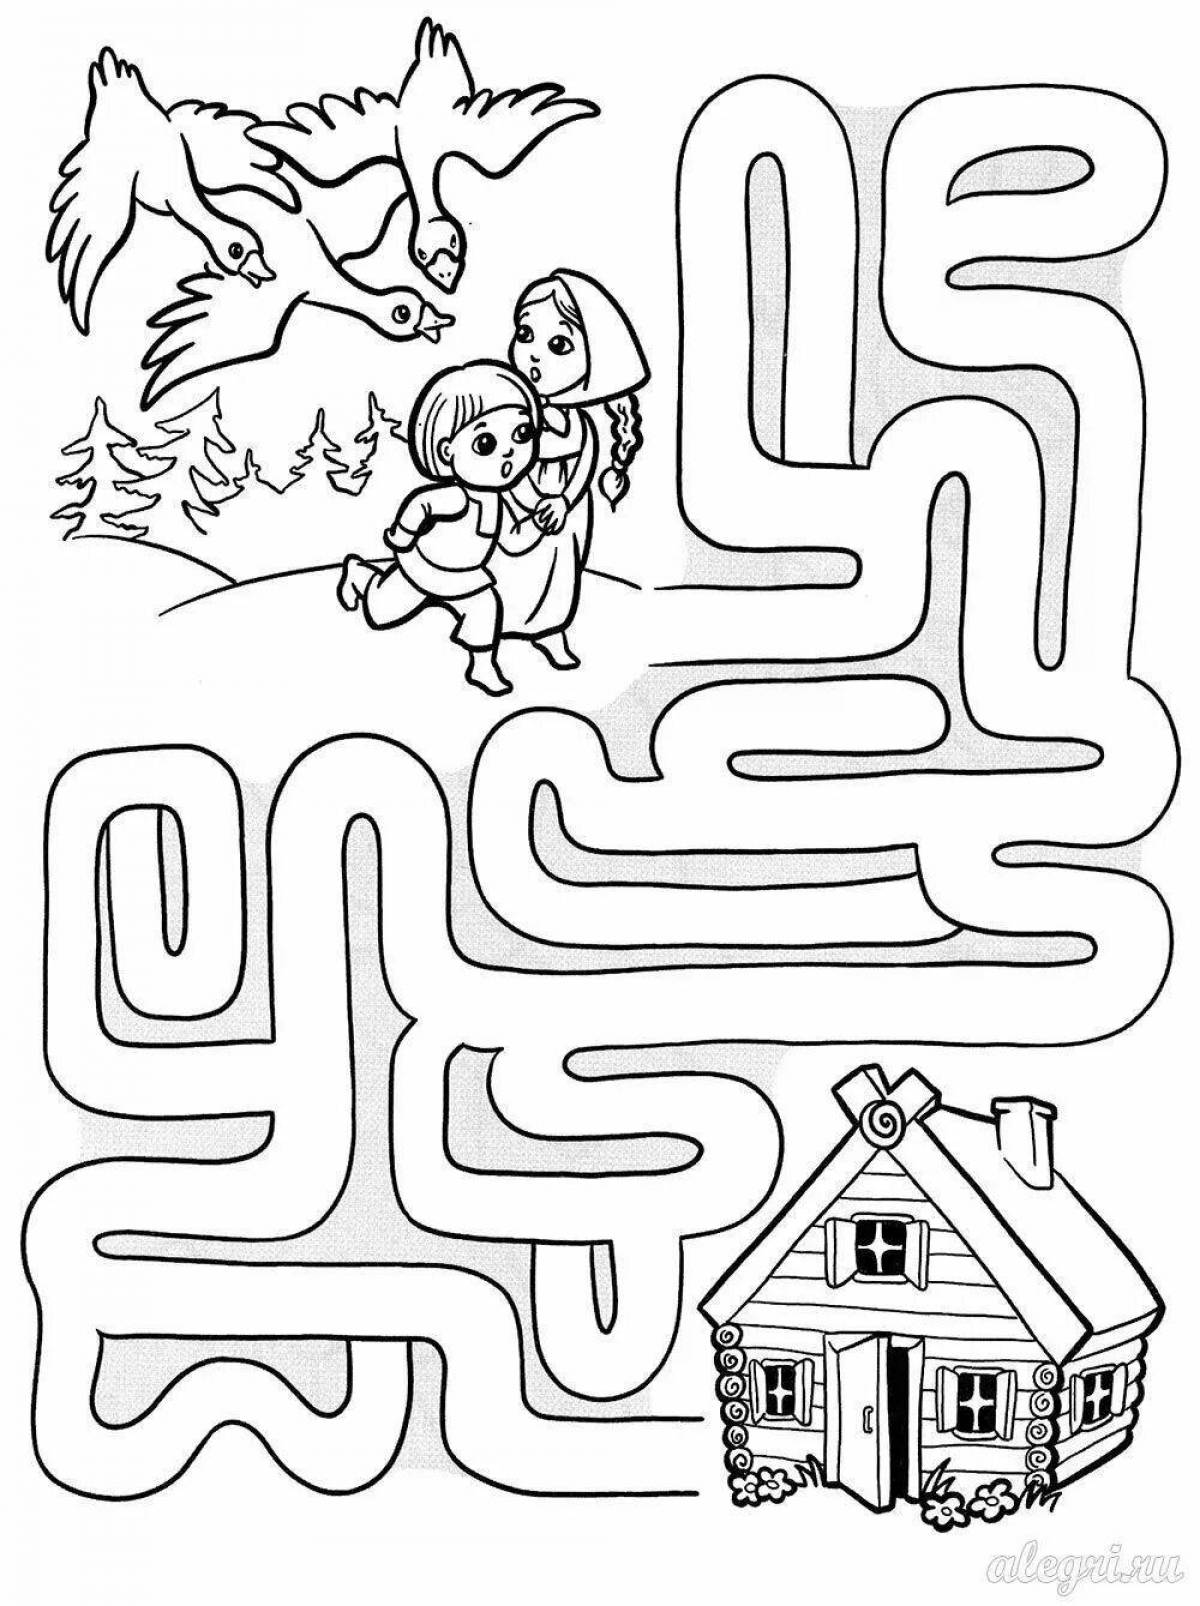 Delightful coloring maze for 3-4 year olds